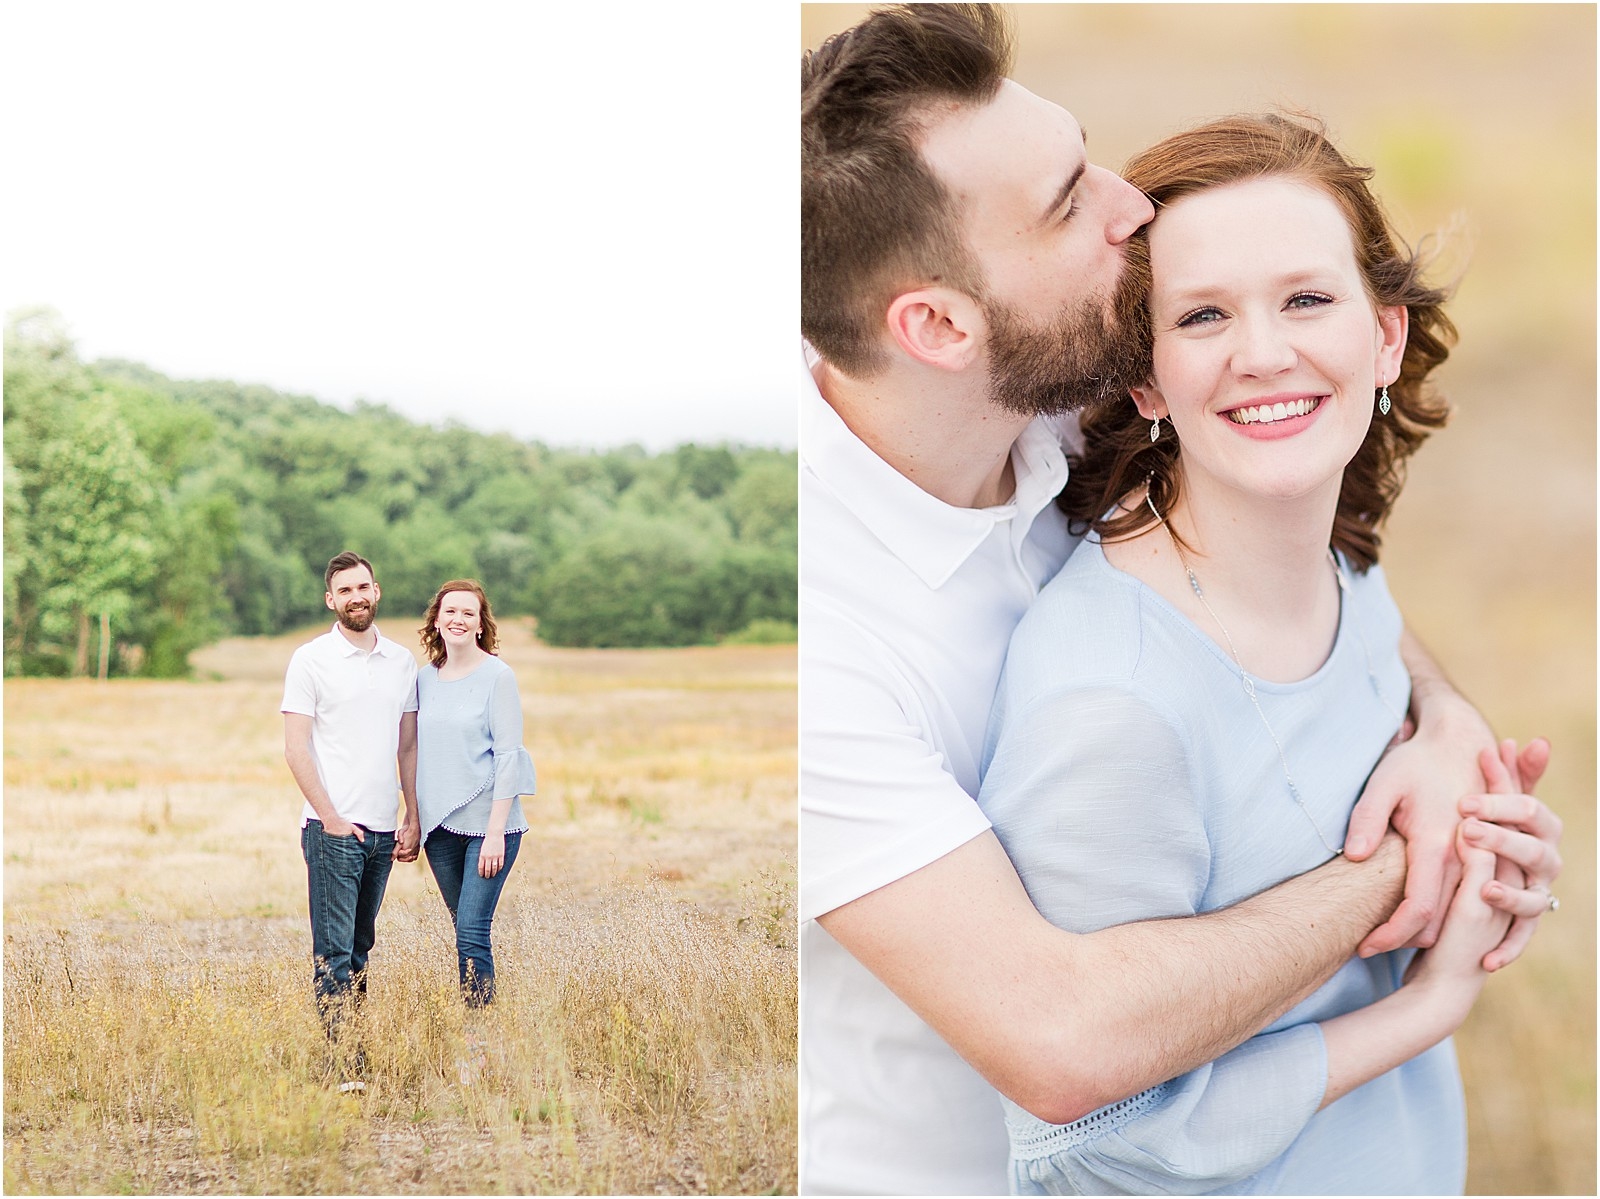 Amy and Logan | The Corner House Bed and Breakfast | Engagement Session008.jpg